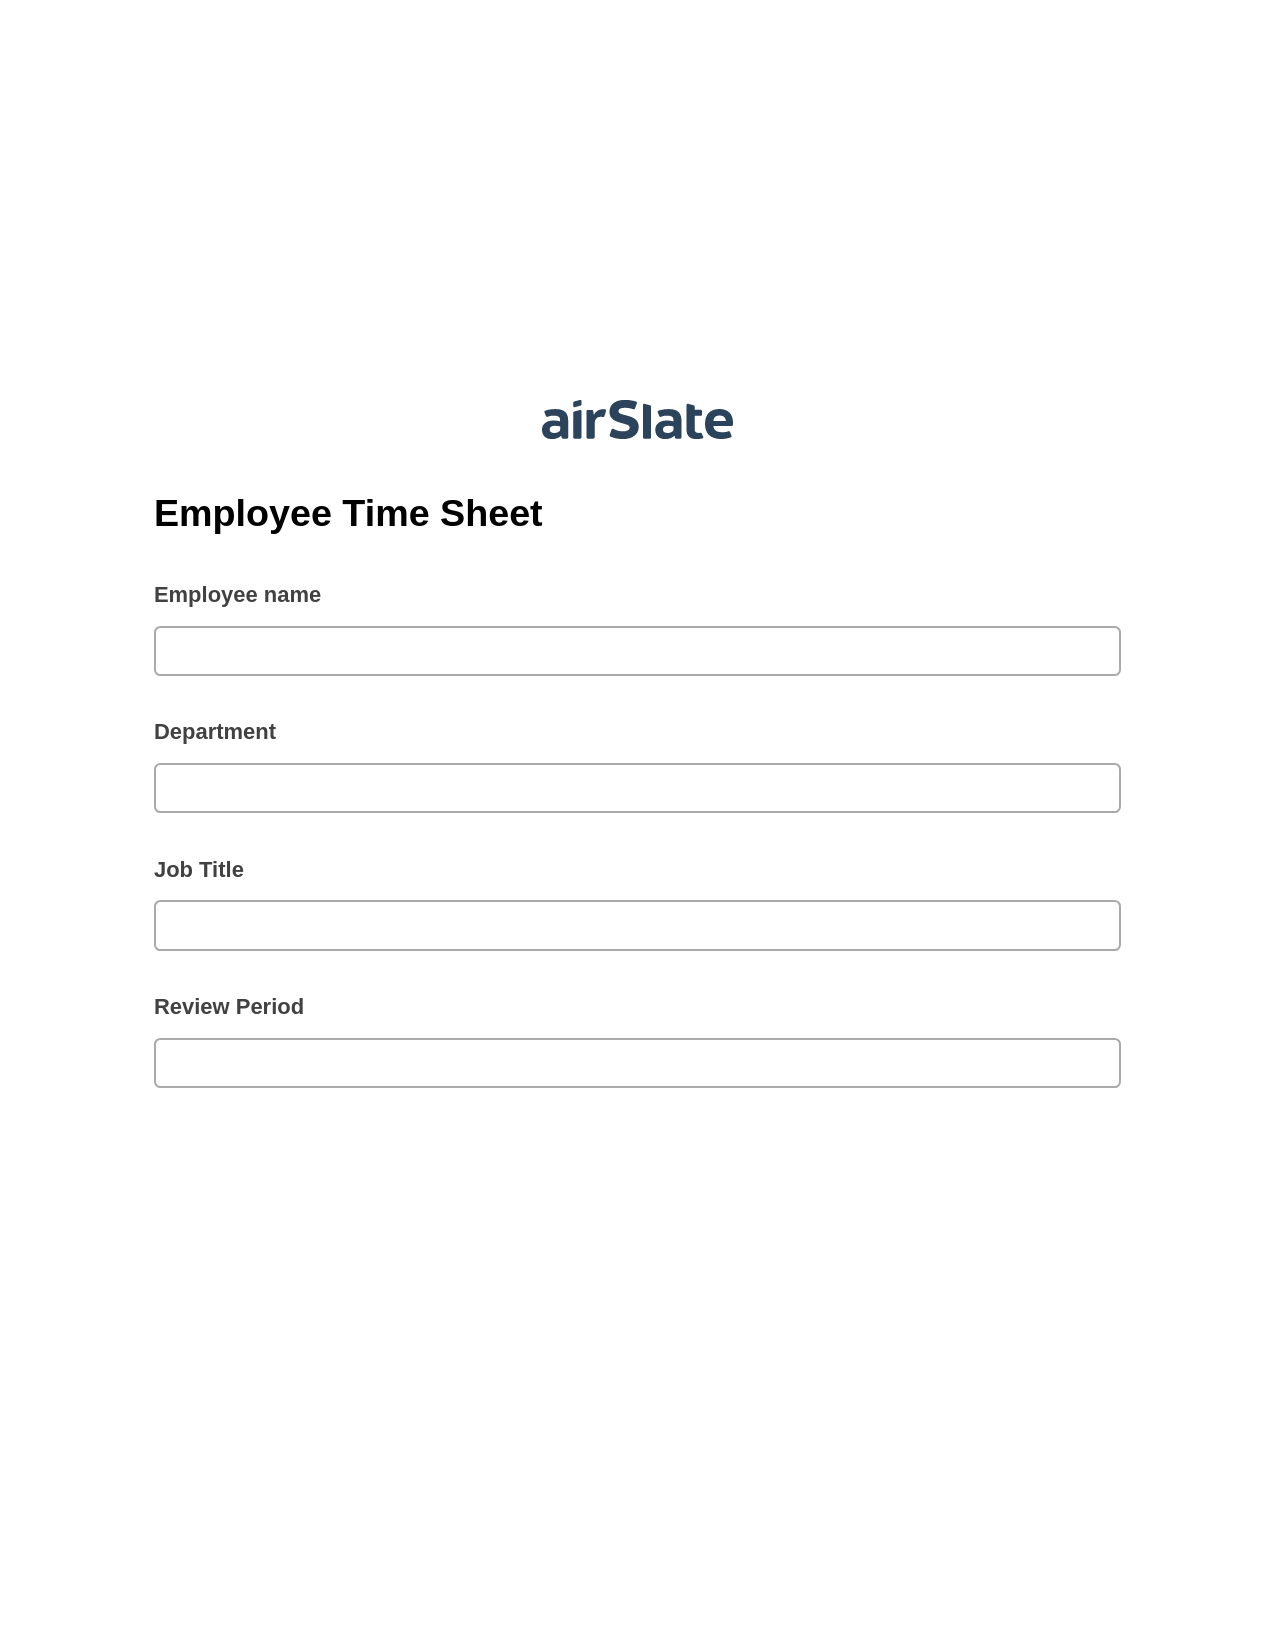 Employee Time Sheet Pre-fill Dropdowns from Excel Bot, Update Audit Trail Bot, Archive to SharePoint Folder Bot